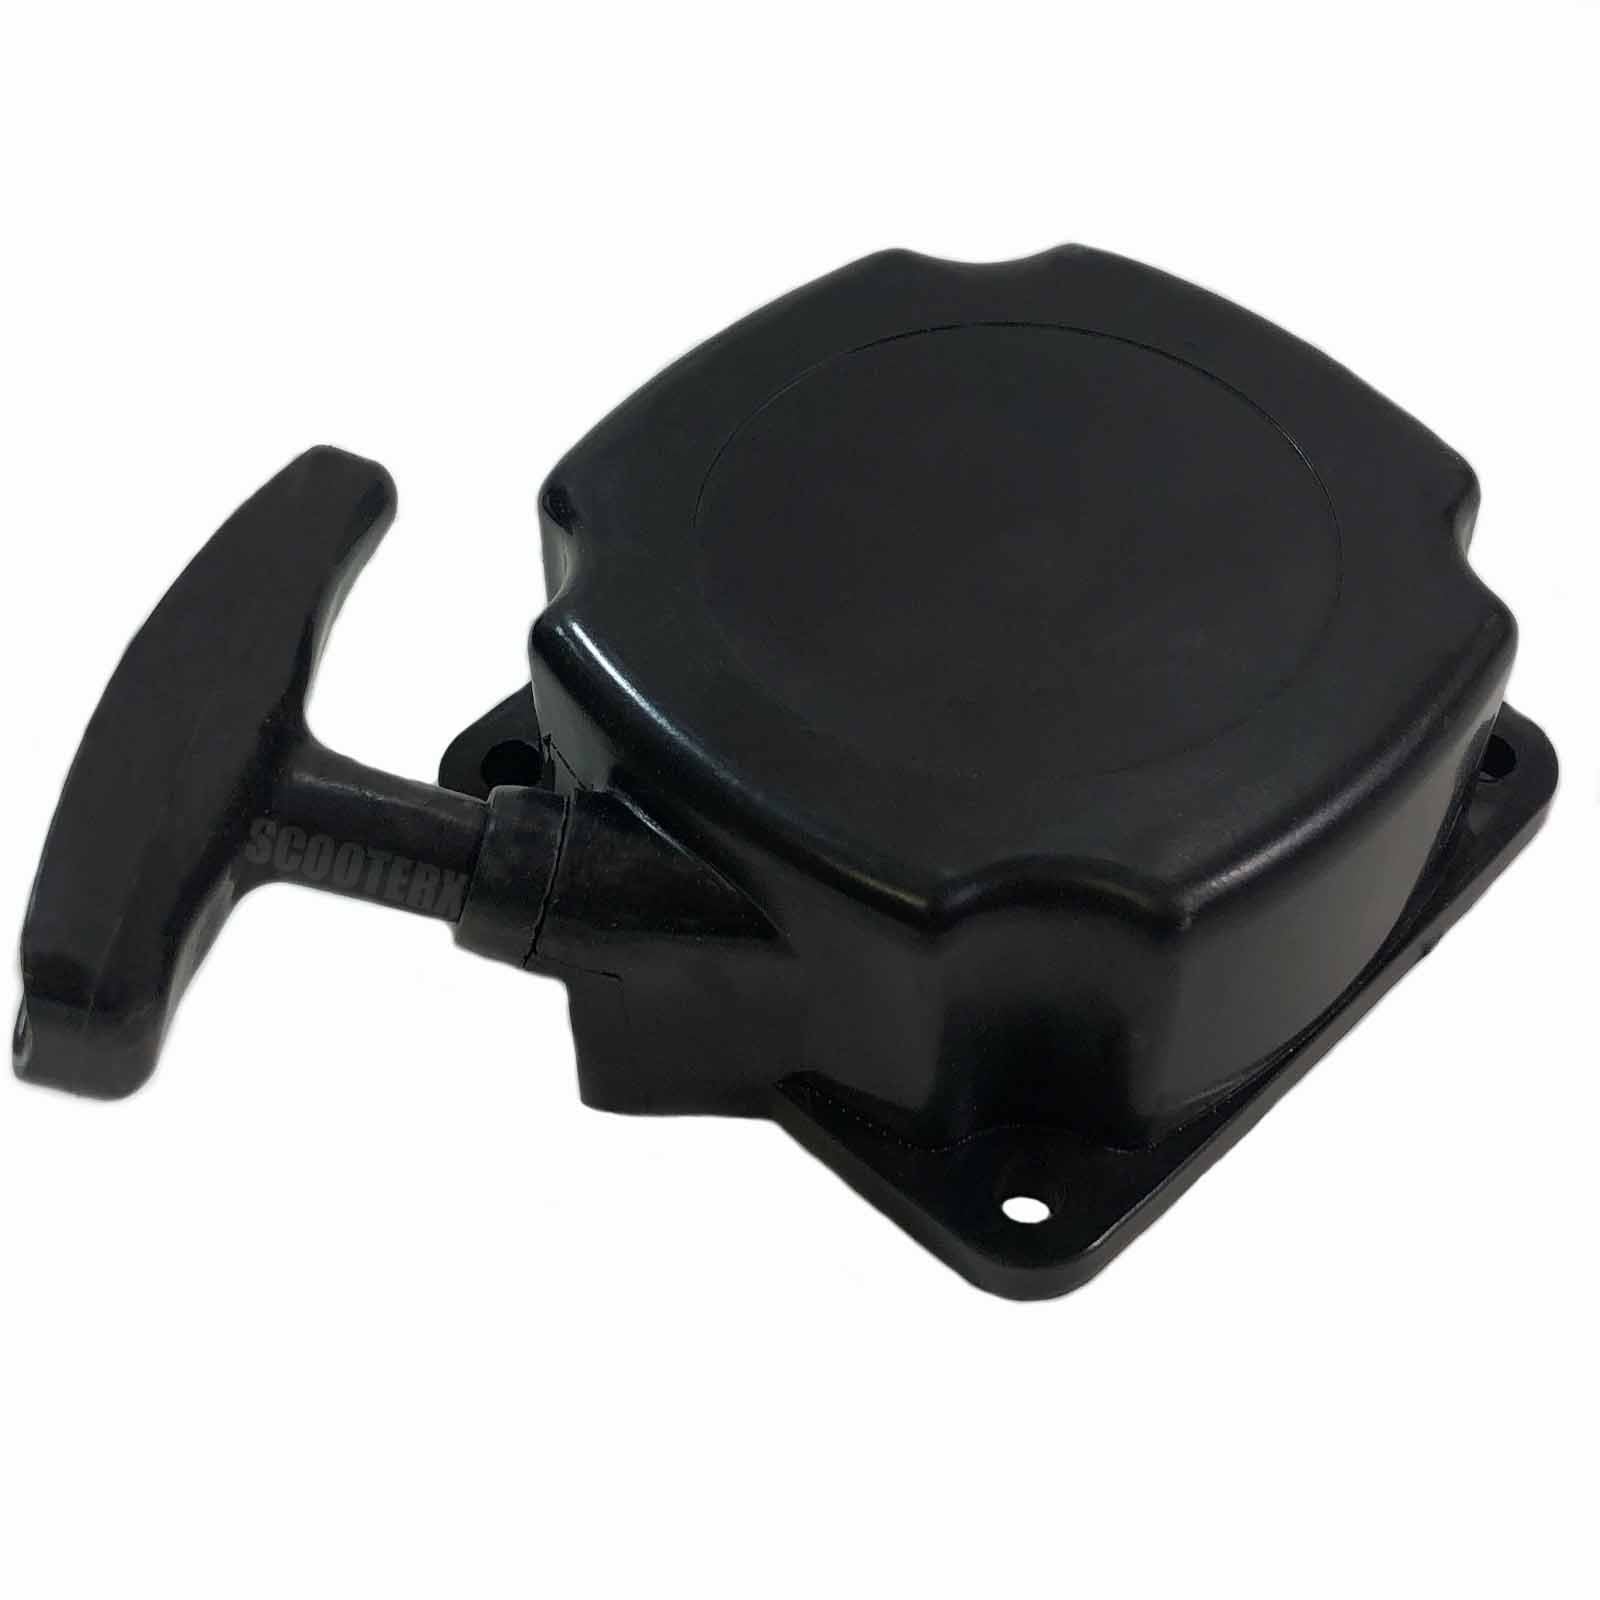 ScooterX PULL STARTER MODEL 2 For Gas Scooters, Bikes, Choppers, Go-Karts